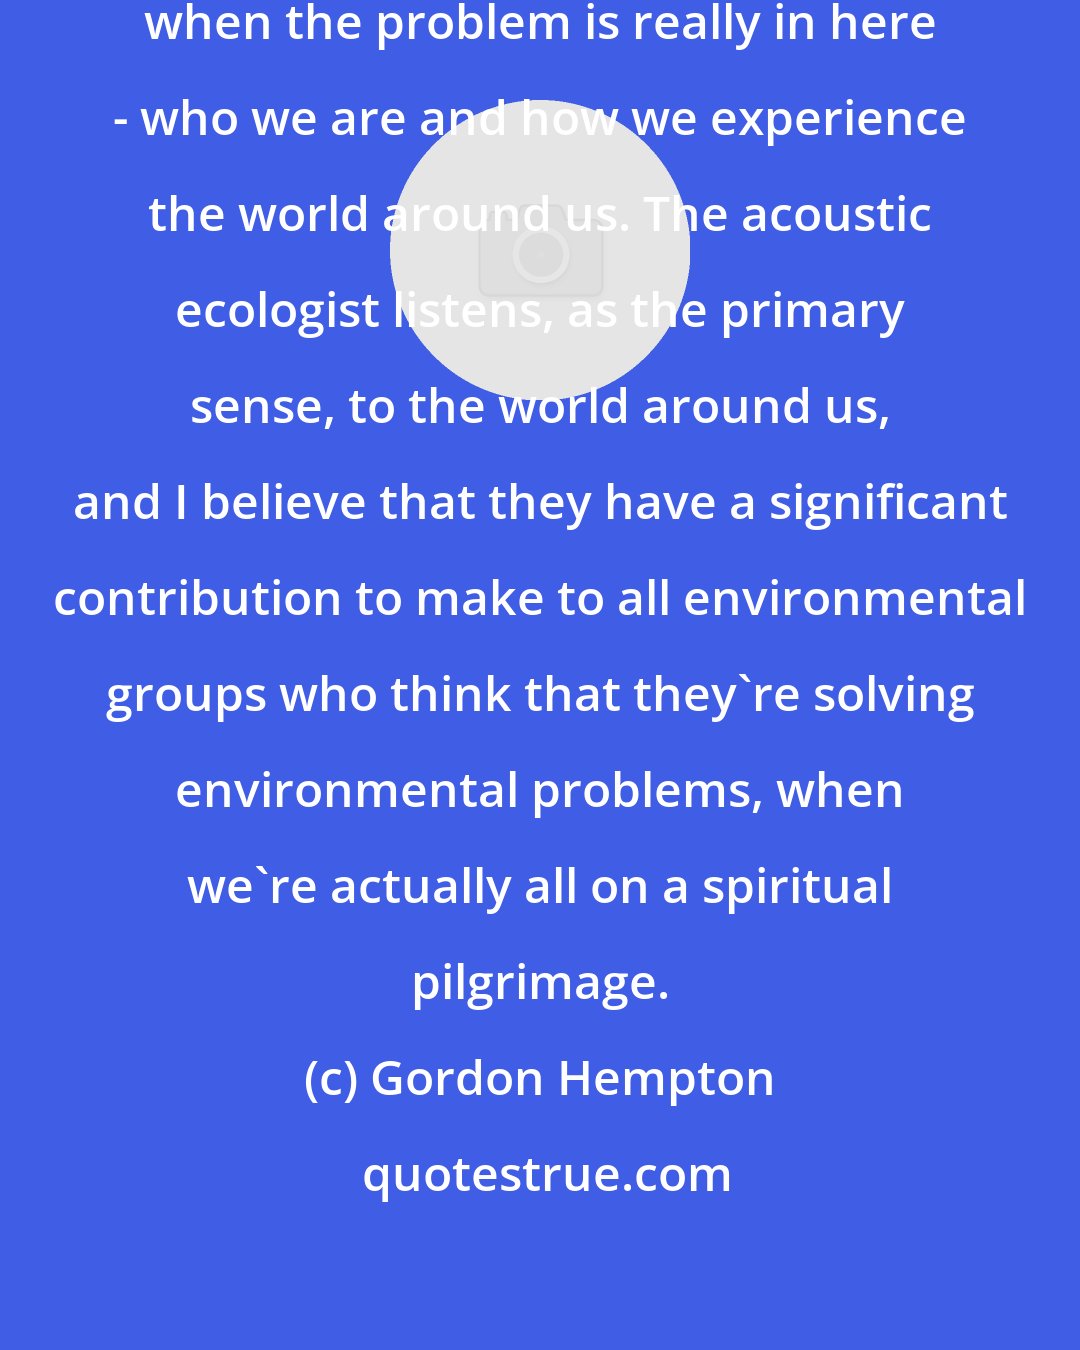 Gordon Hempton: We think the problem is out there, when the problem is really in here - who we are and how we experience the world around us. The acoustic ecologist listens, as the primary sense, to the world around us, and I believe that they have a significant contribution to make to all environmental groups who think that they're solving environmental problems, when we're actually all on a spiritual pilgrimage.